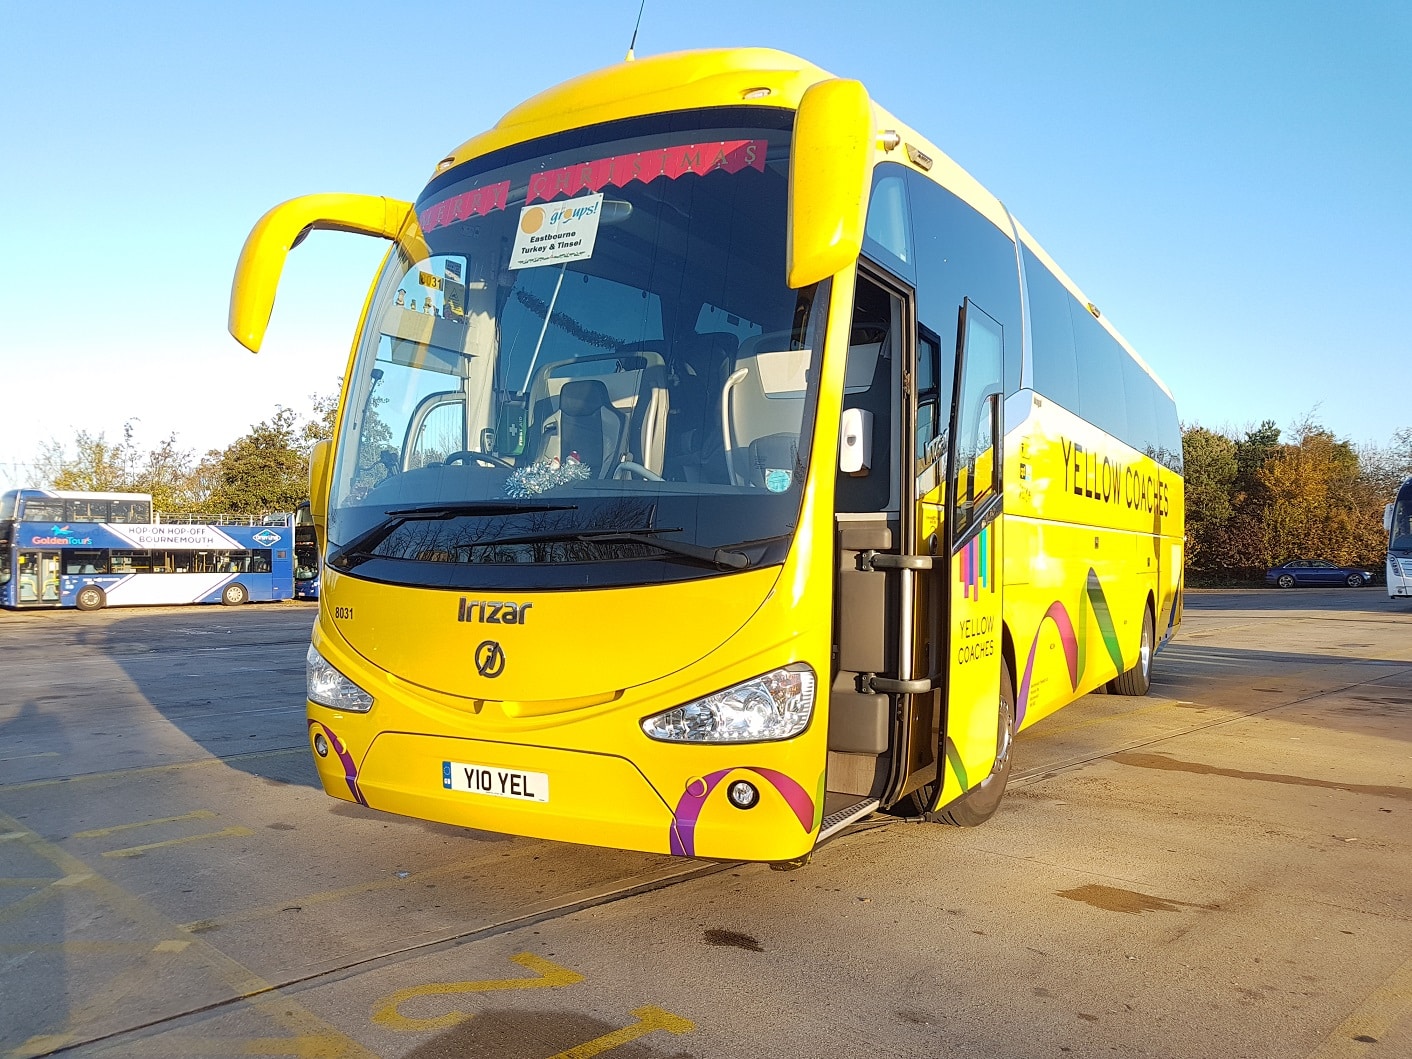 Yellow Coaches business and brand purchased by Xela Group